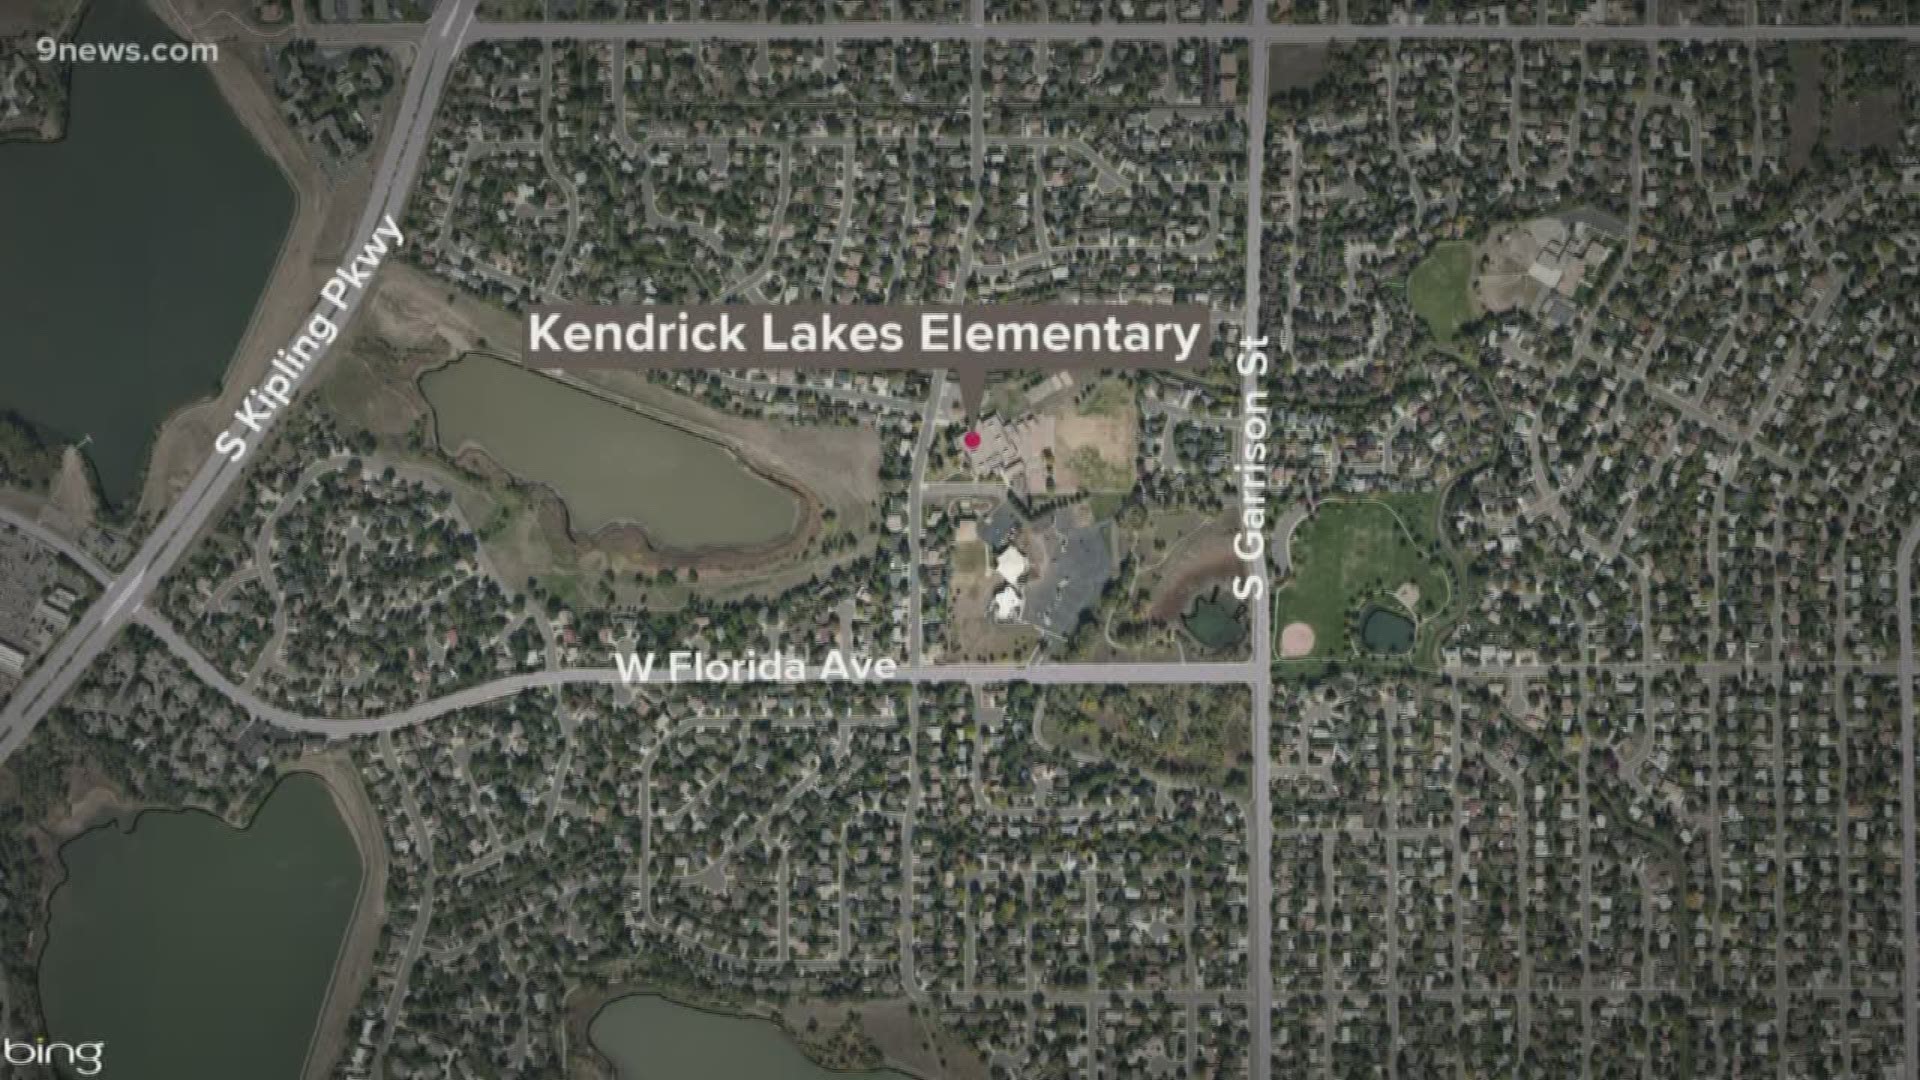 Lakewood Police were called to a construction site near Kendrick Lakes Elementary School